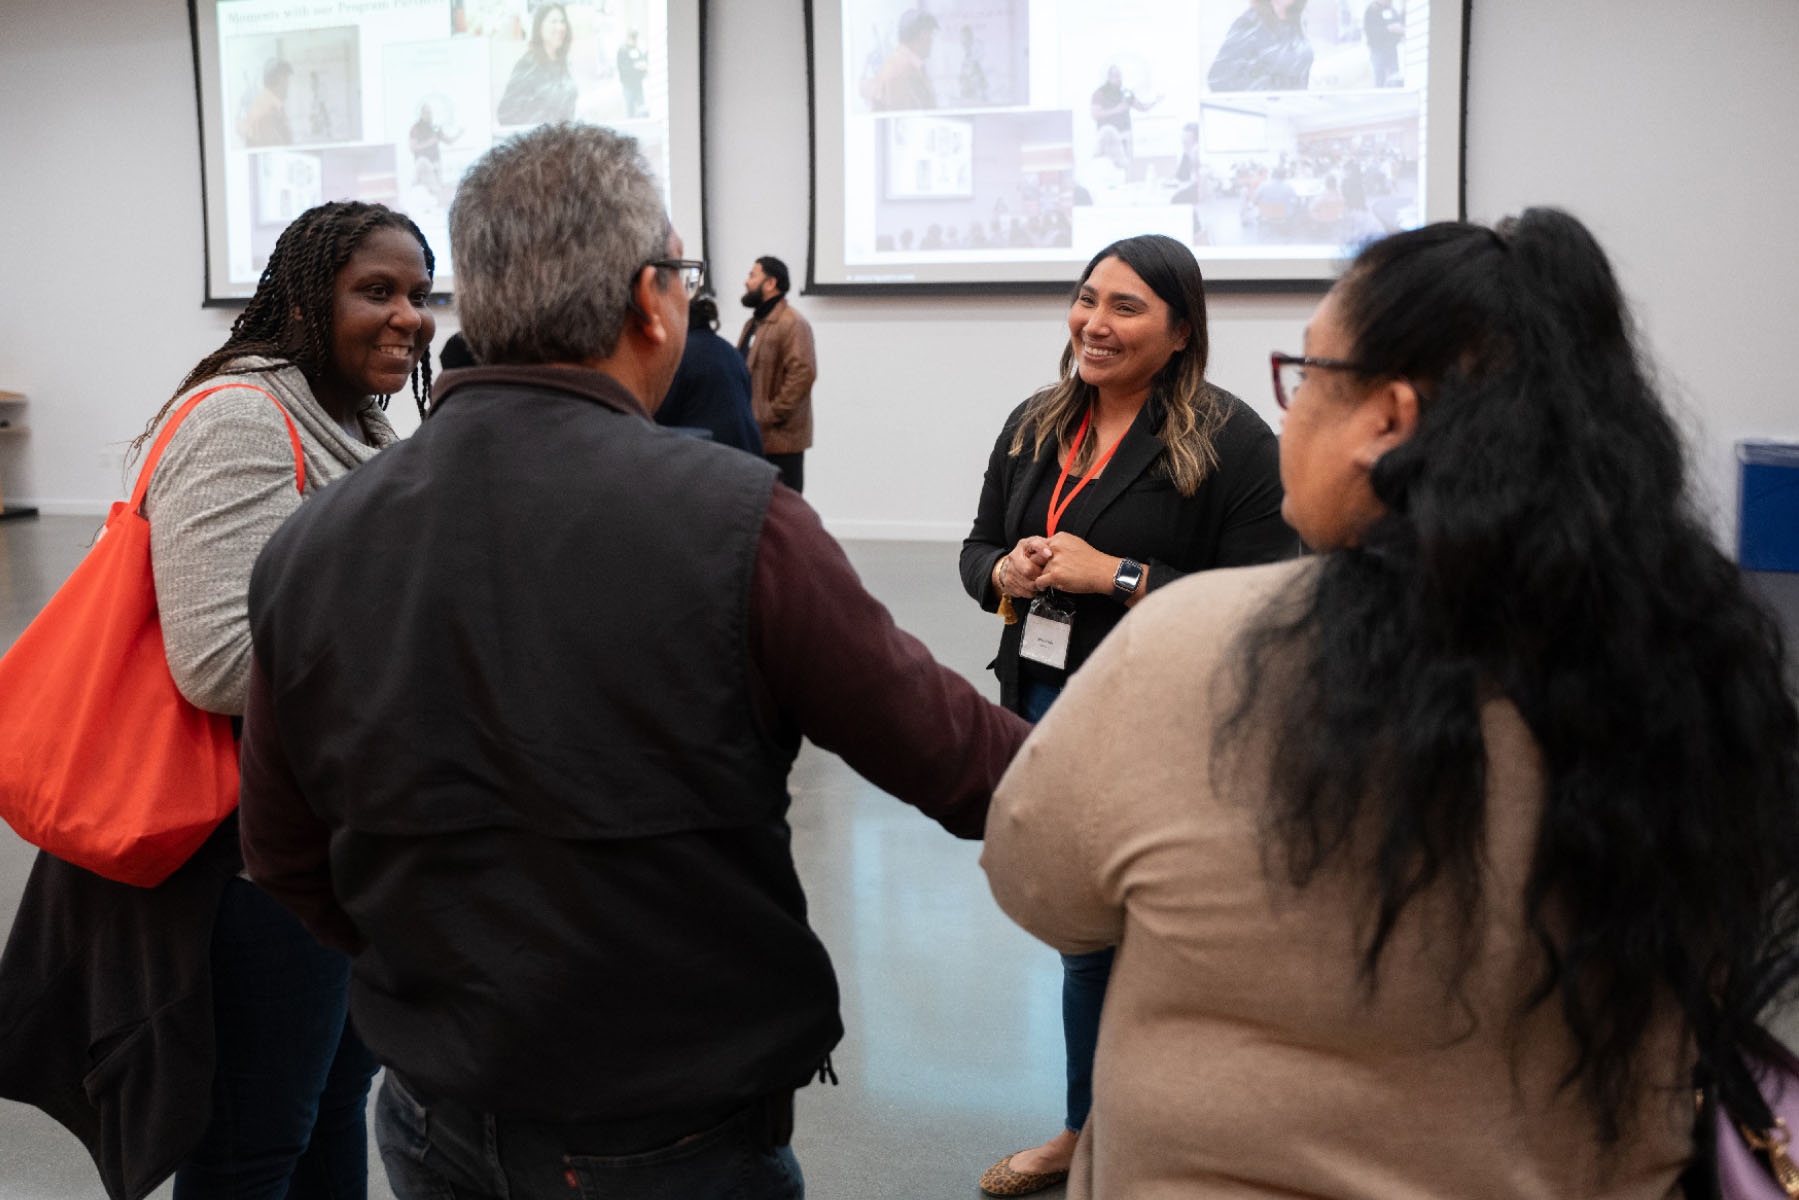 Community Affairs Programs Officer Alma Pulido chats with guests during an Open House in the CZI Community Space.